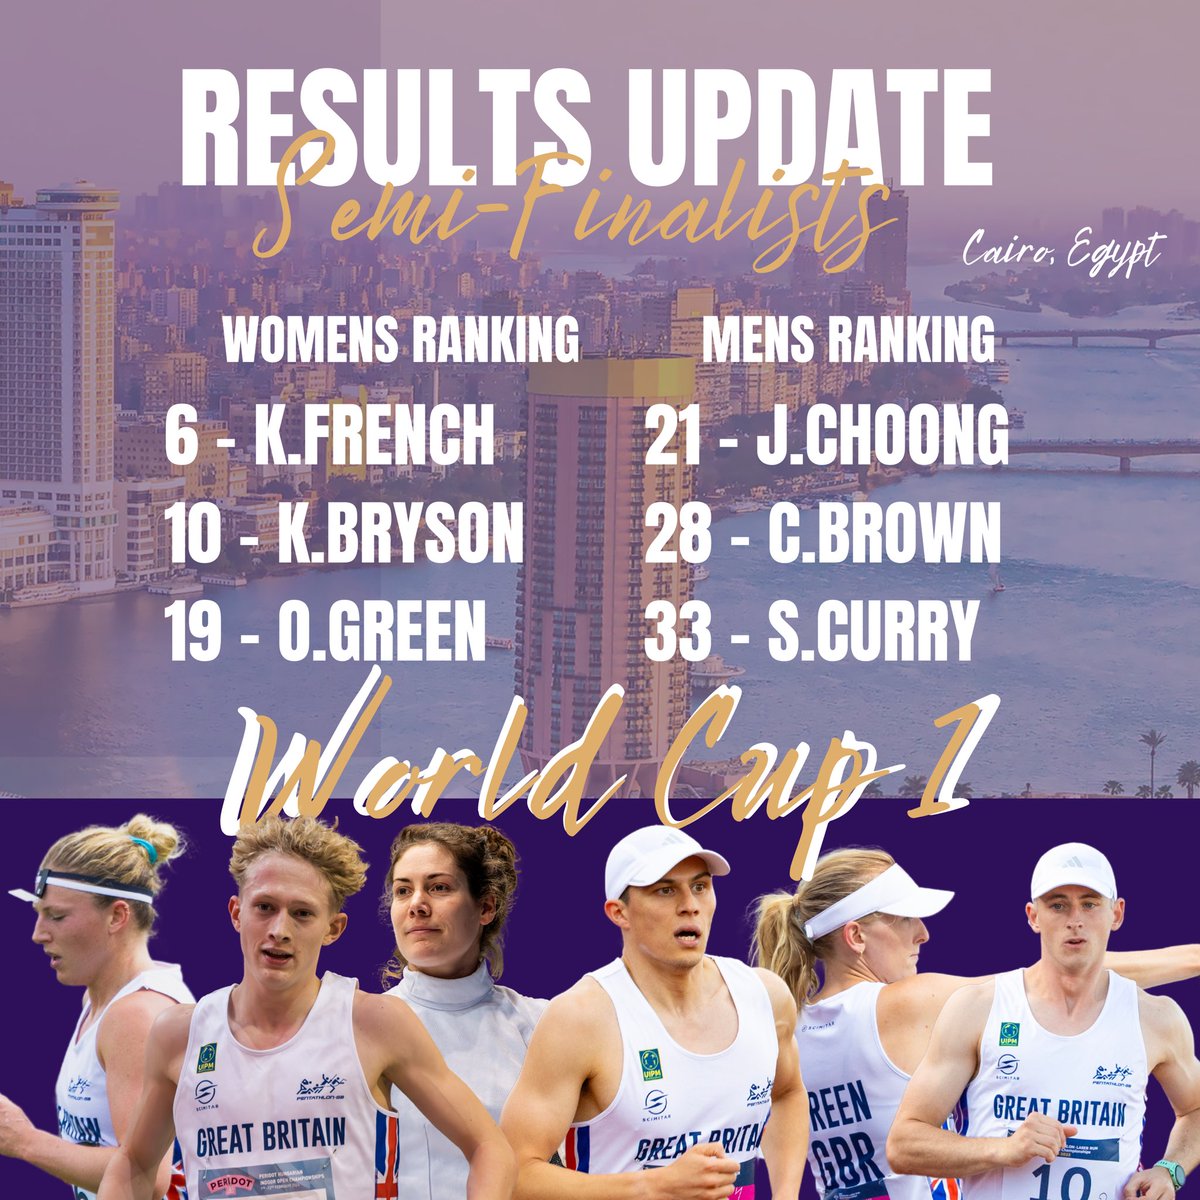 WORLD CUP 1 - 6 Semi-finalists 🤩 6 of our athletes will take part in the semi-finals in Cairo over the next two days! Good Luck team 💪🏻